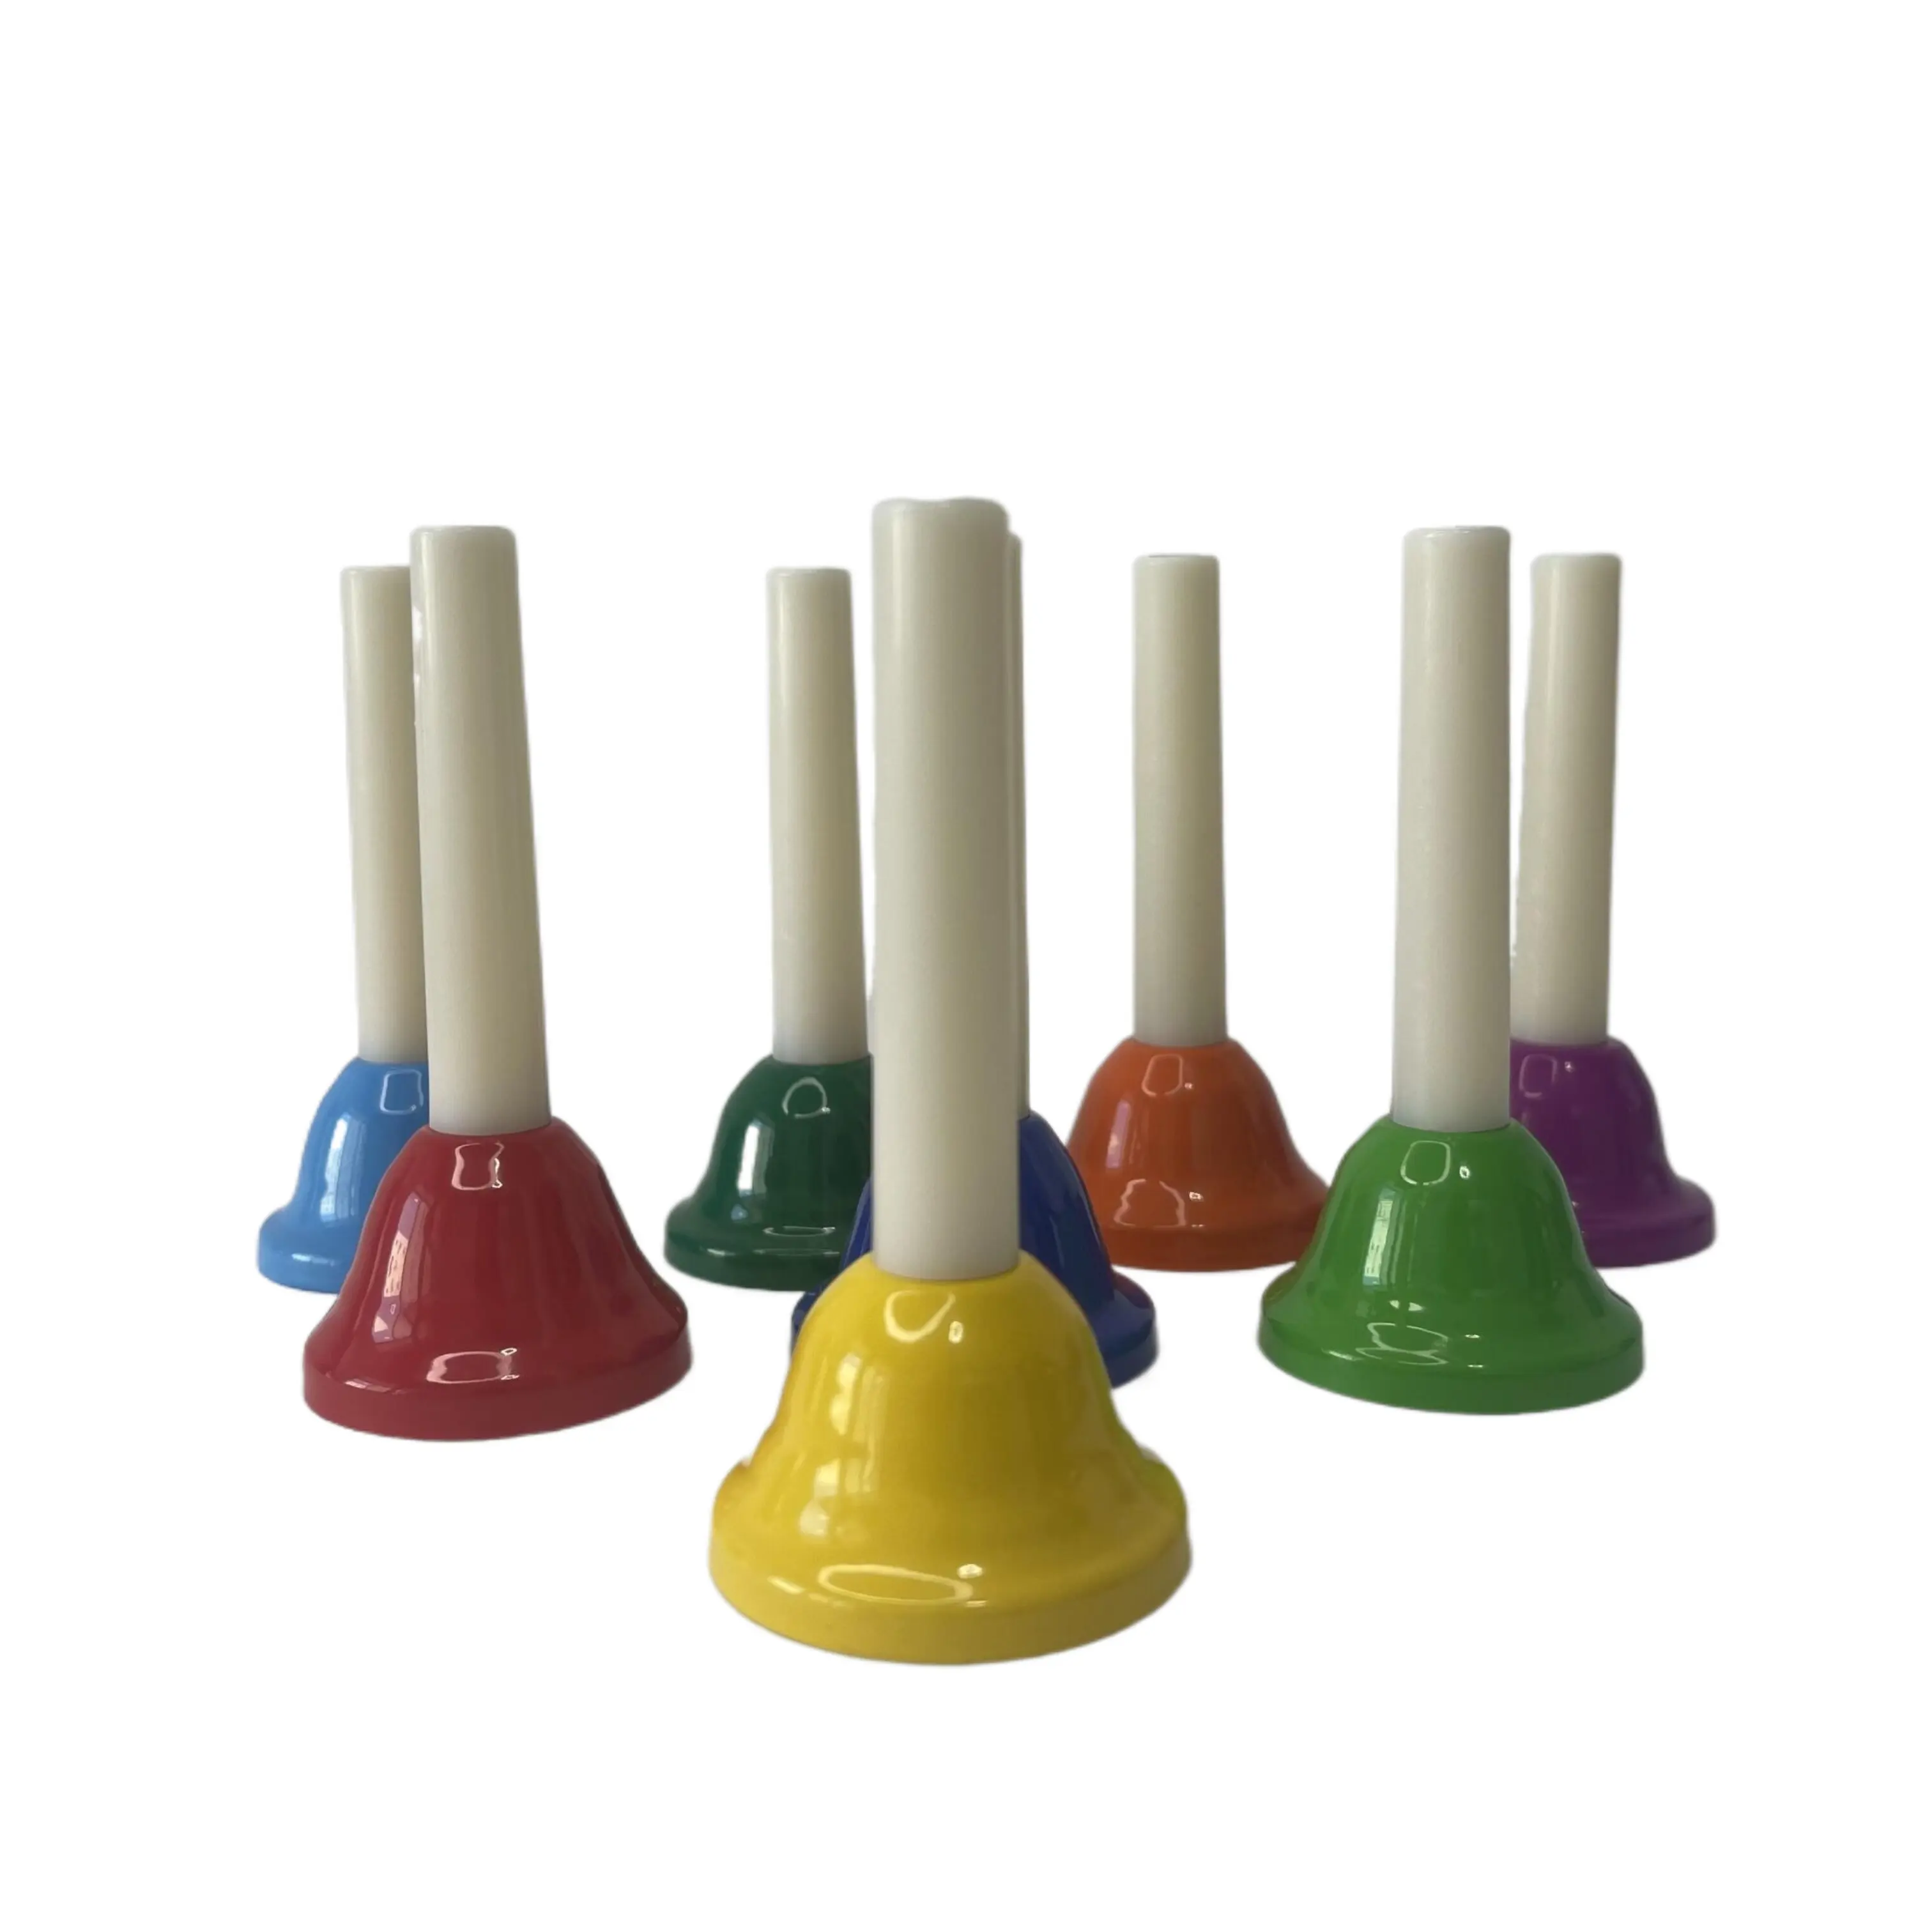 Longer service life free after sale pc metal hand rattle bells kids music shaking plastic toys instruments hand bells